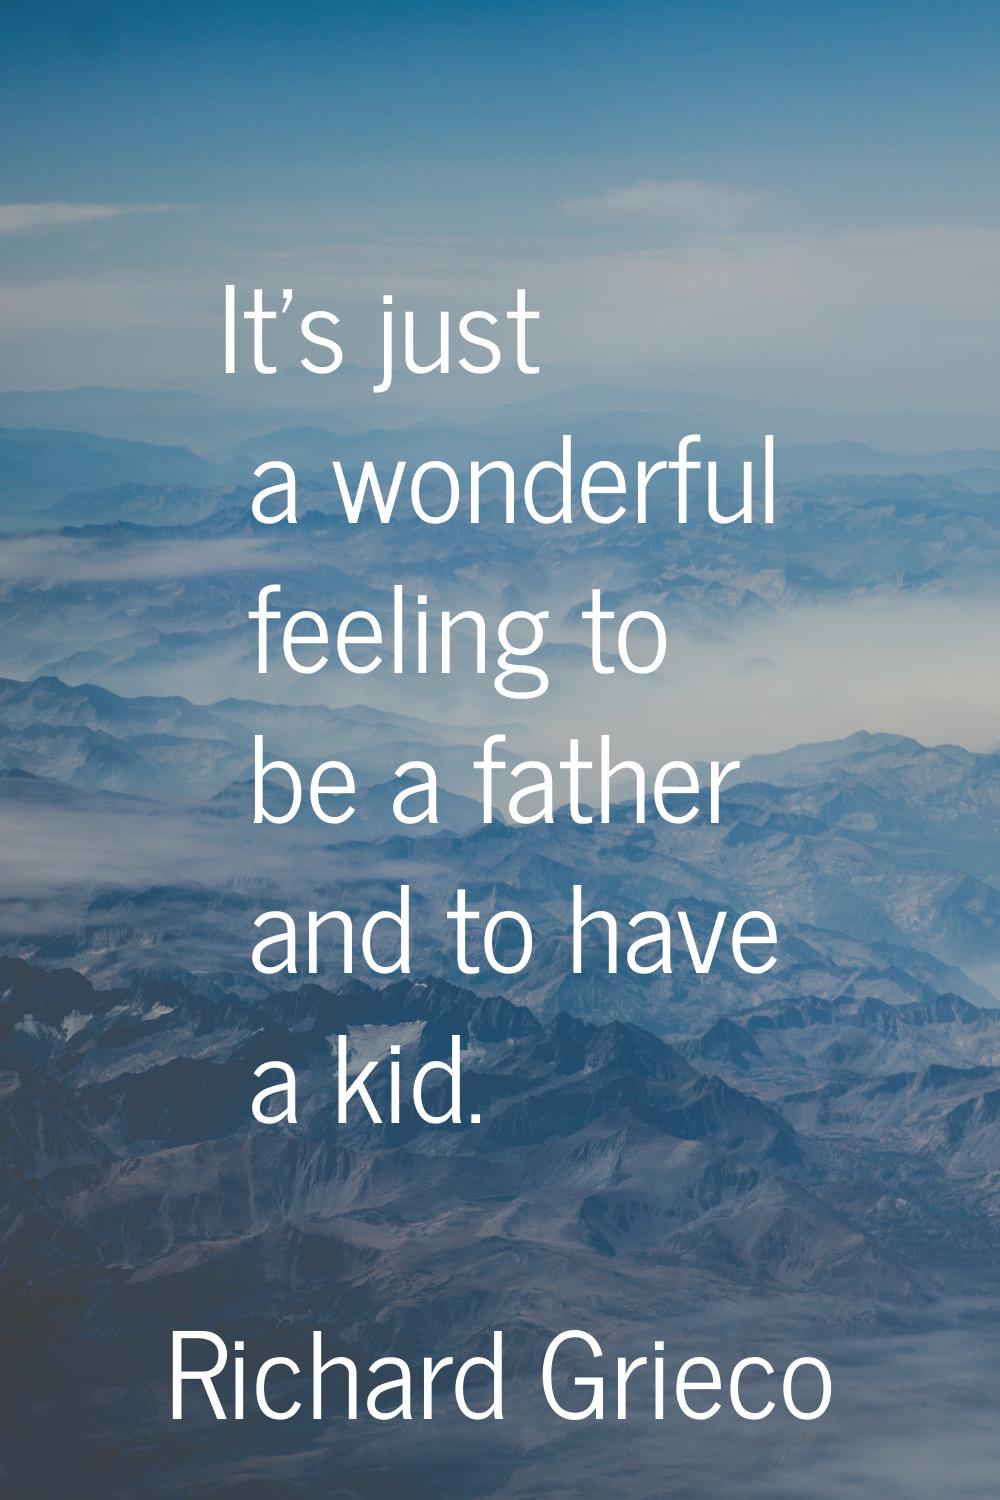 It's just a wonderful feeling to be a father and to have a kid.